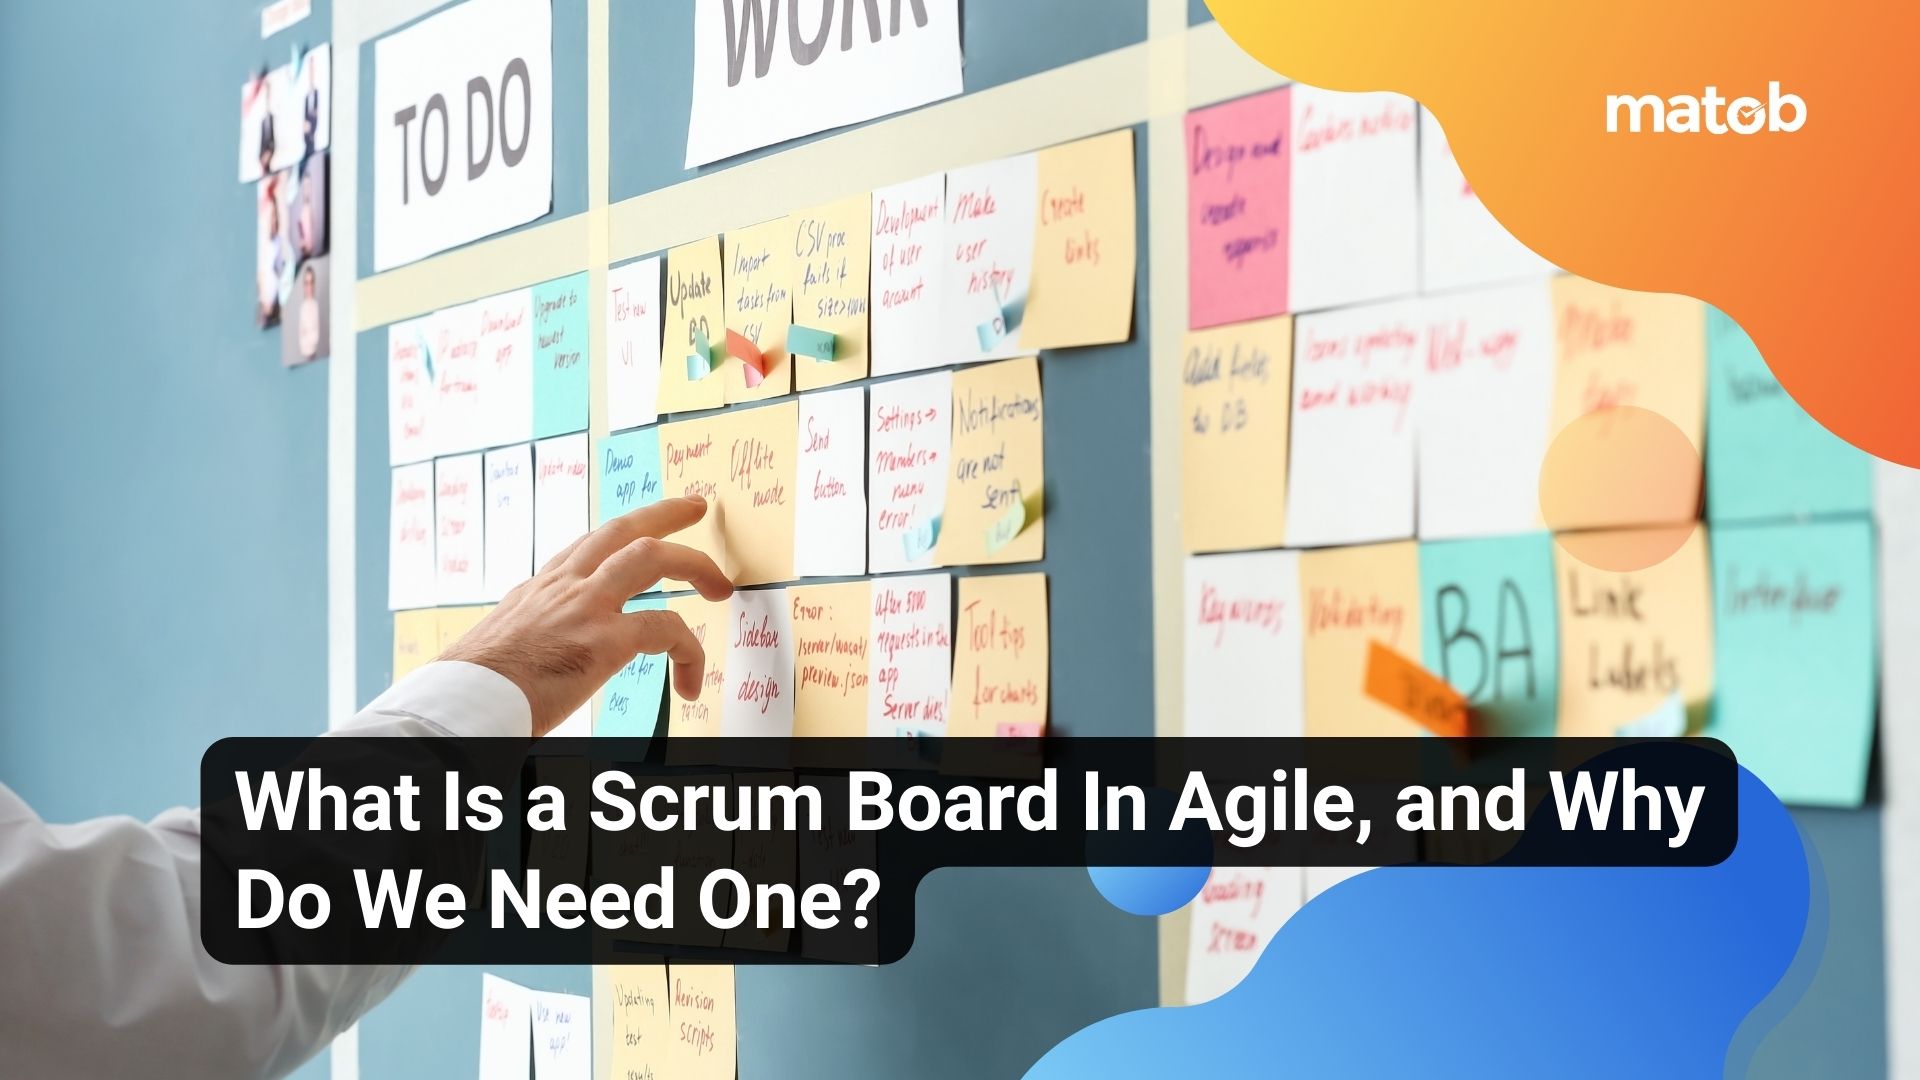 What Is a Scrum Board In Agile, and Why Do We Need One?